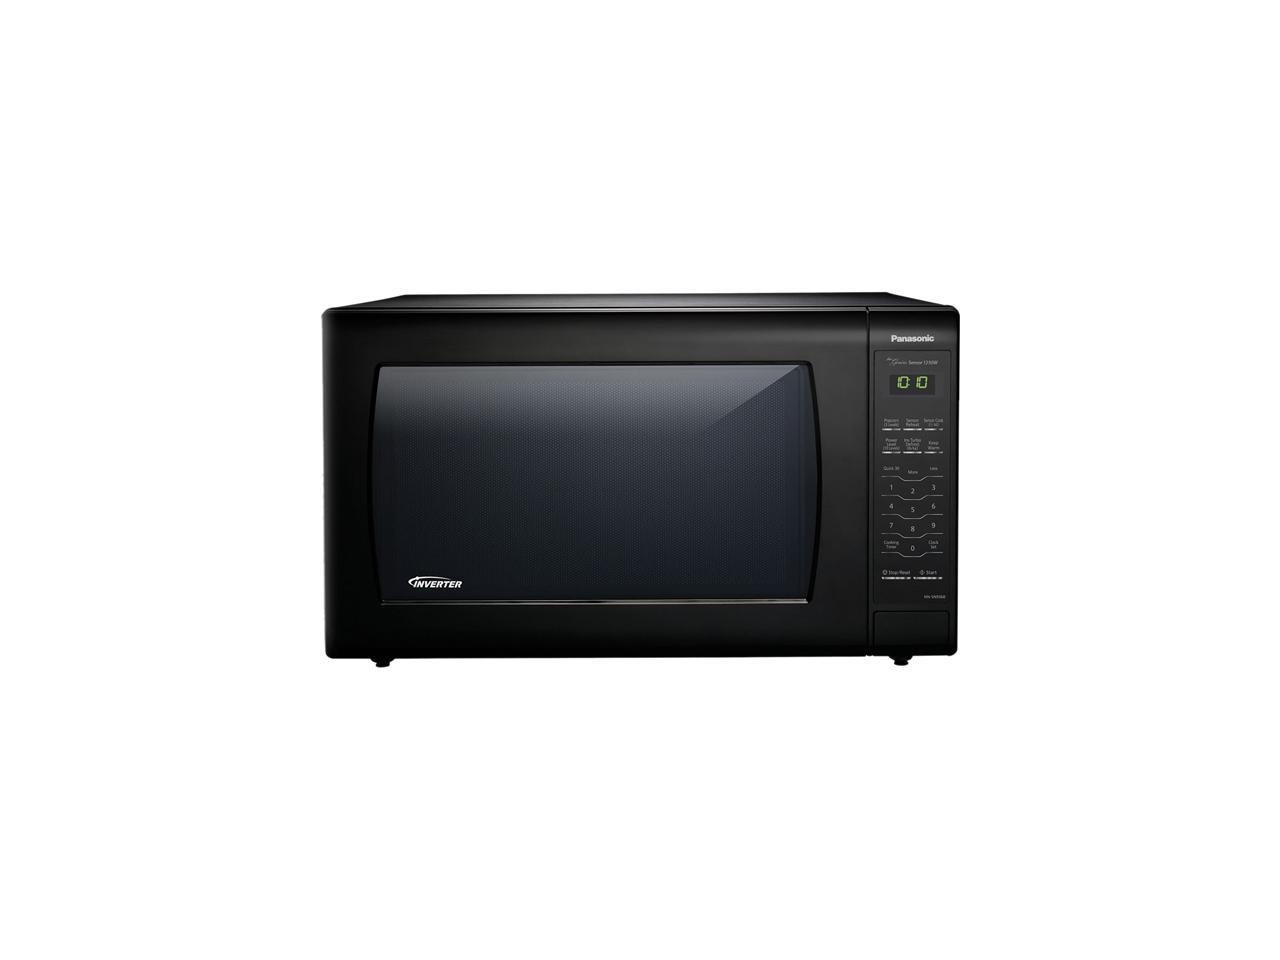 Panasonic 22 Cu Ft Countertop Microwave Oven With Inverter